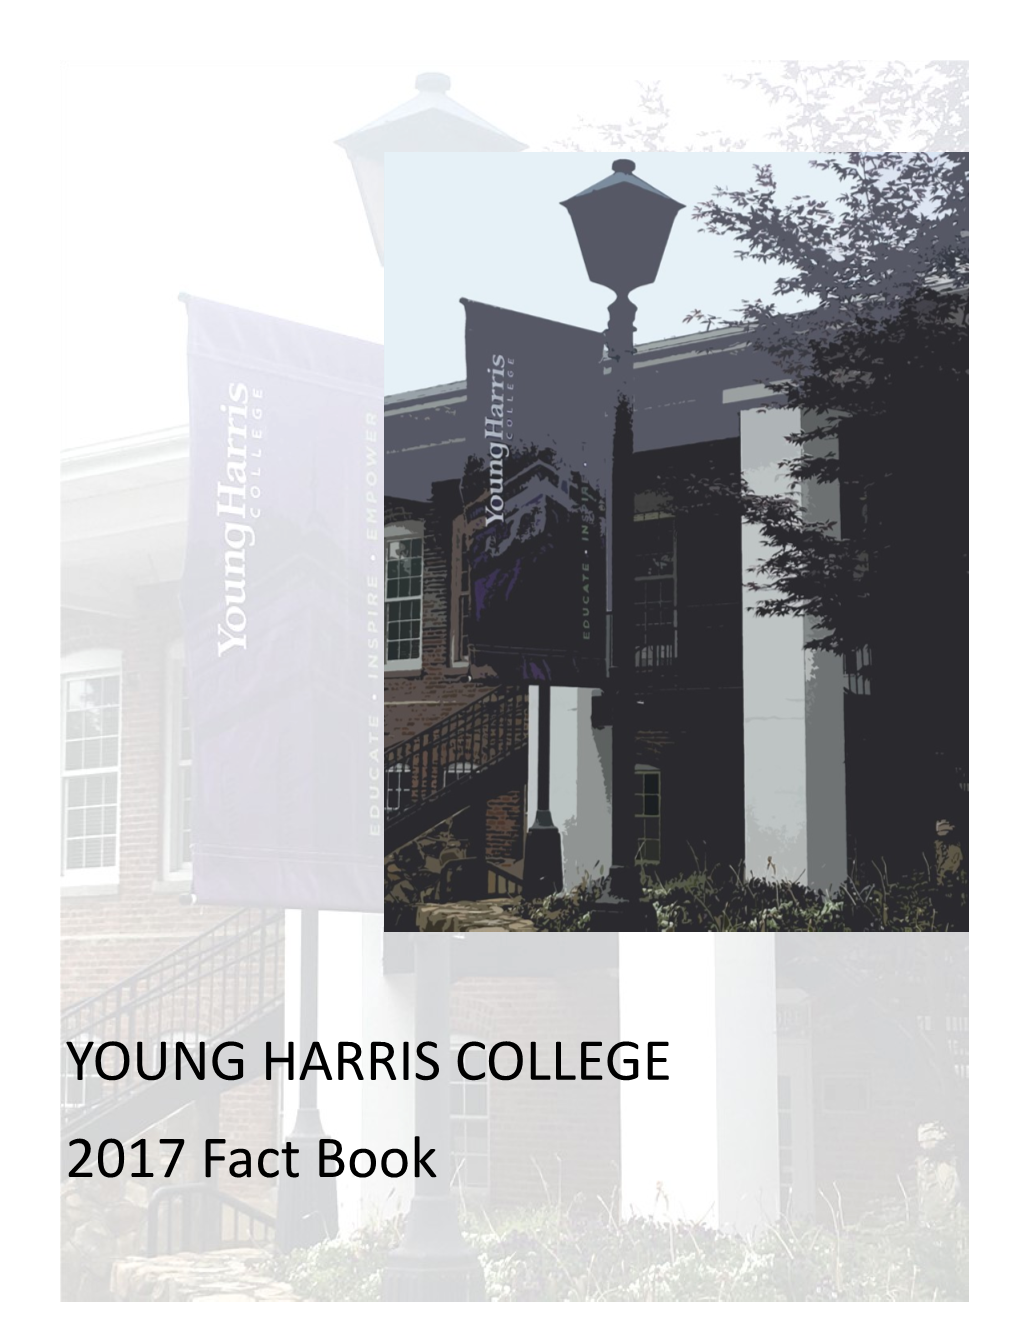 YOUNG HARRIS COLLEGE 2017 Fact Book